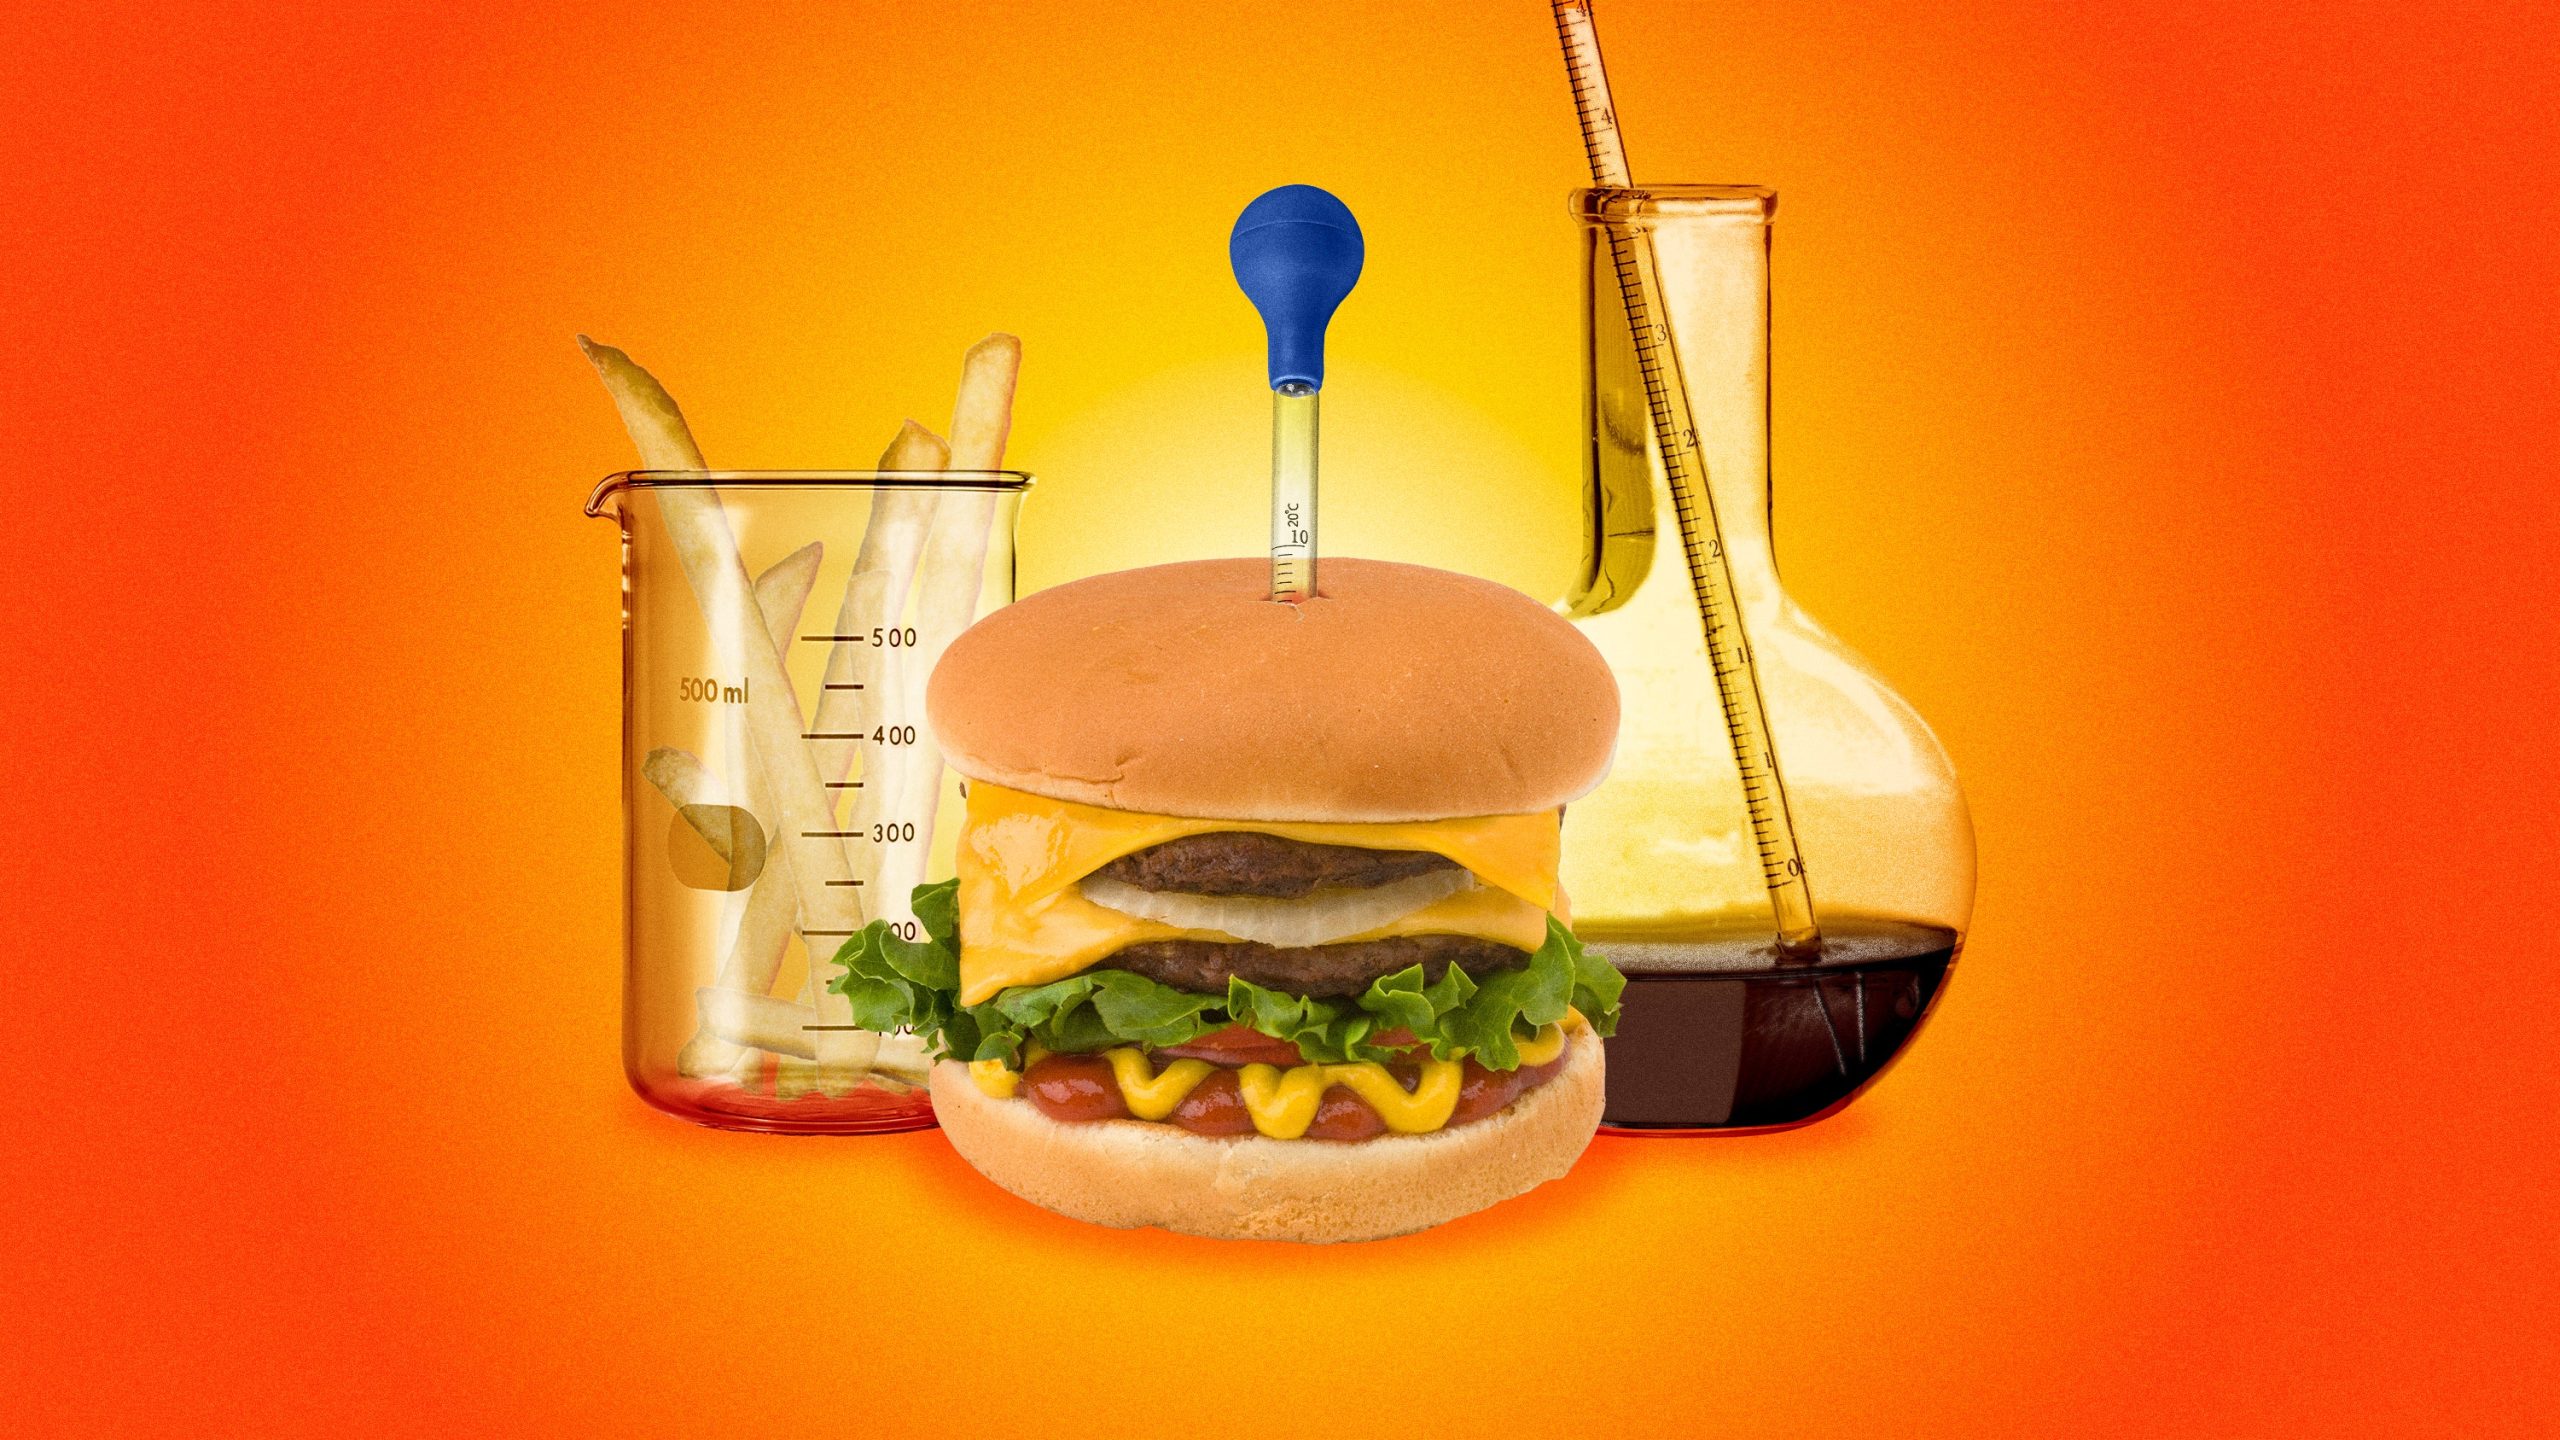 The Case for Briefly Eating Tons of UltraProcessed Food